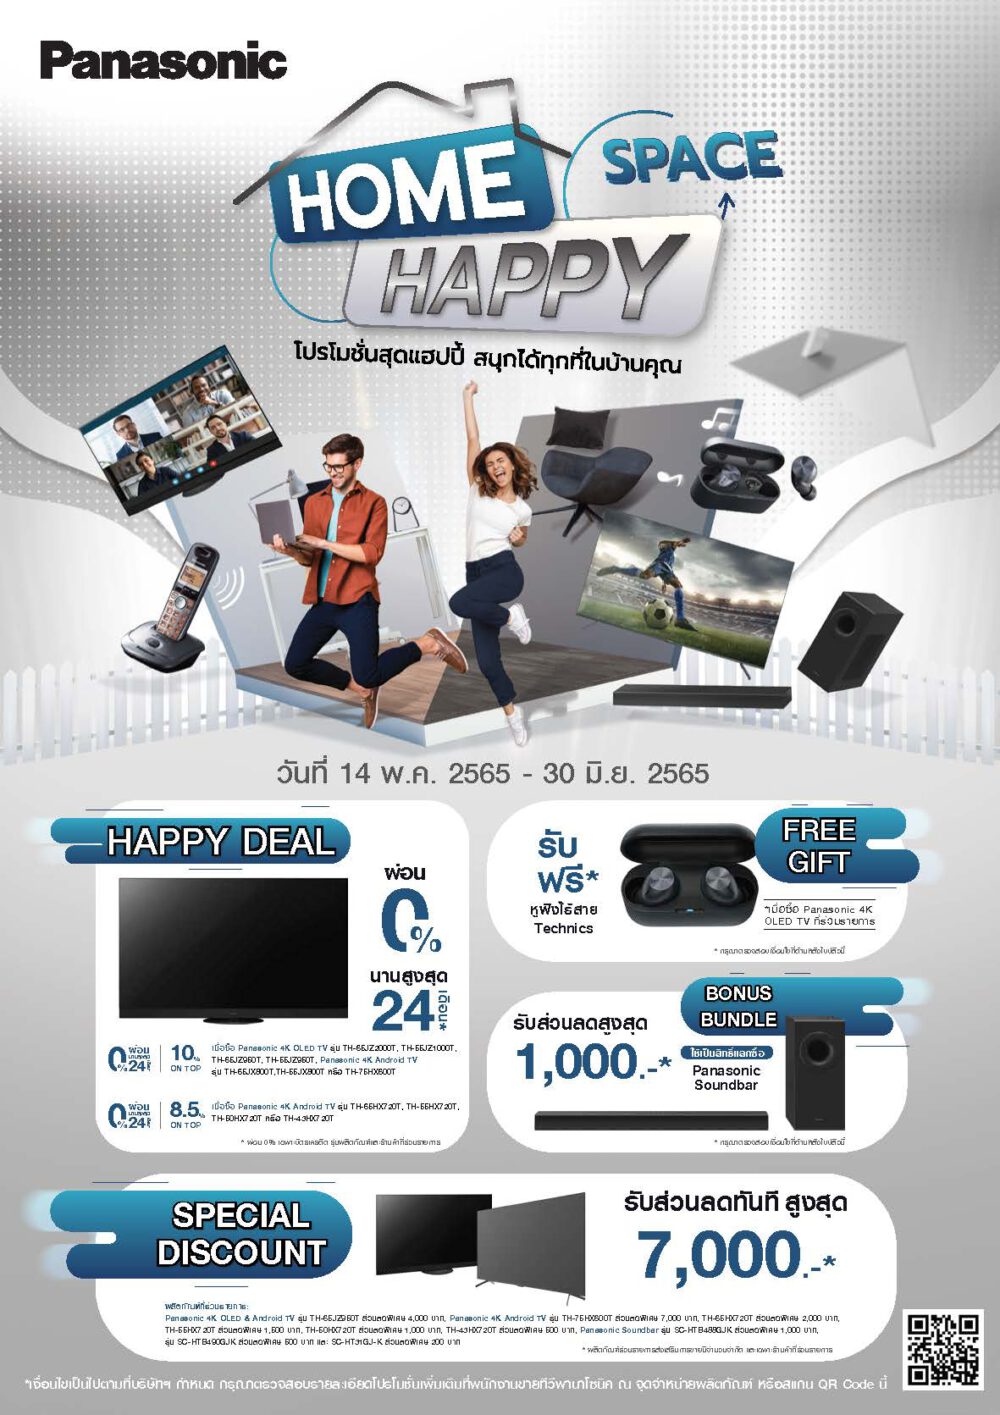 Leaflet_Panasonic-Home-Happy-Space-002_Page_1-0.jpg